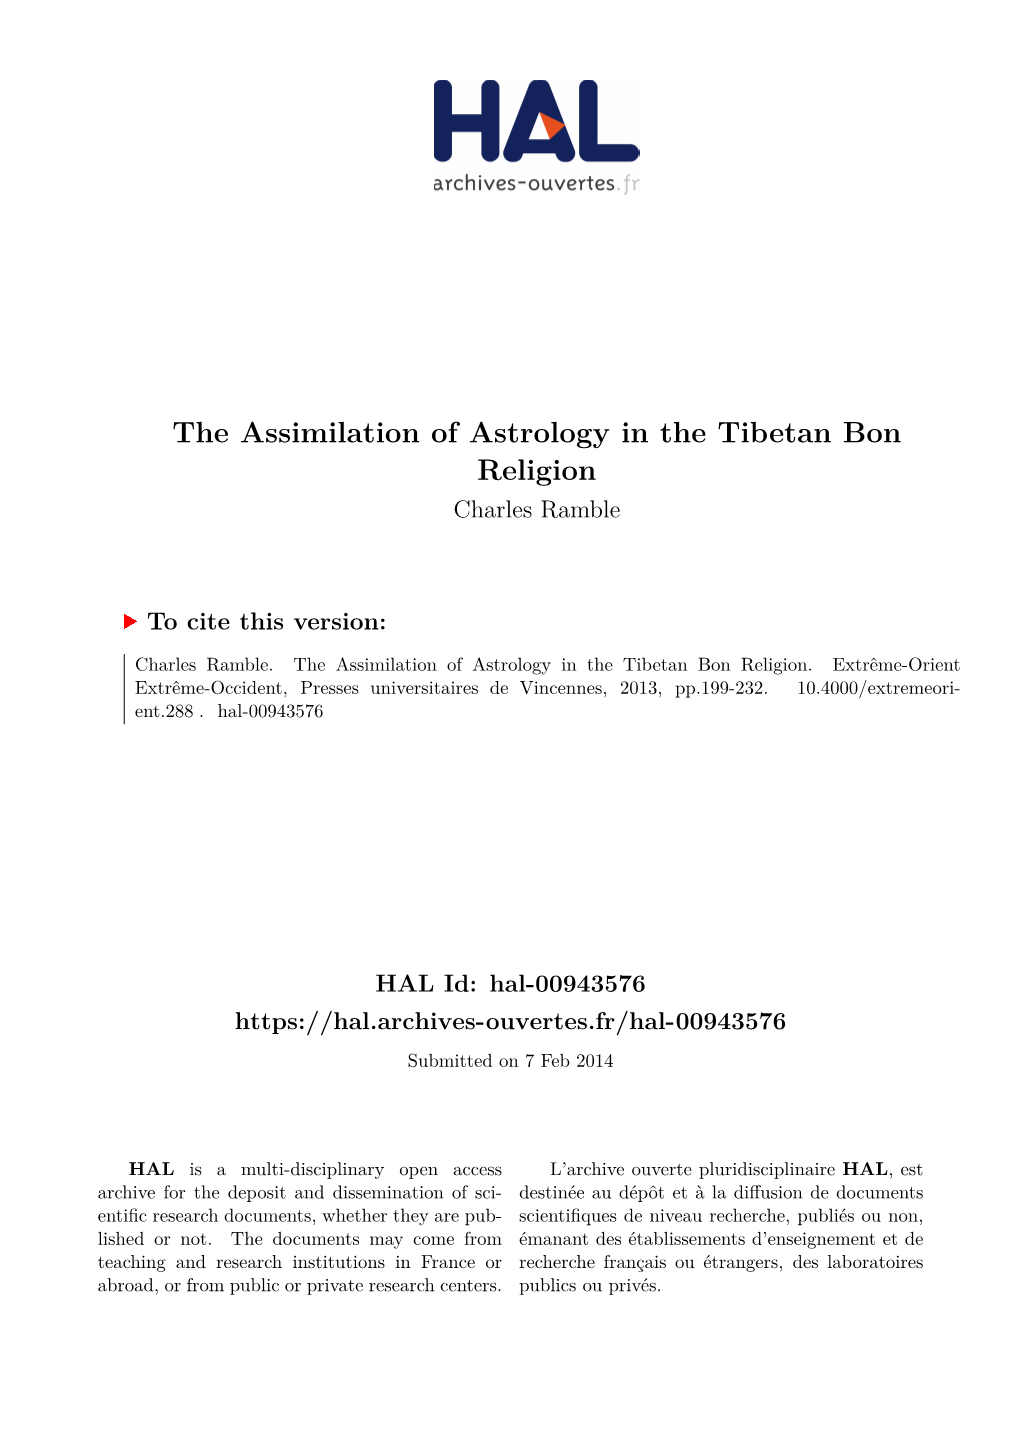 The Assimilation of Astrology in the Tibetan Bon Religion Charles Ramble